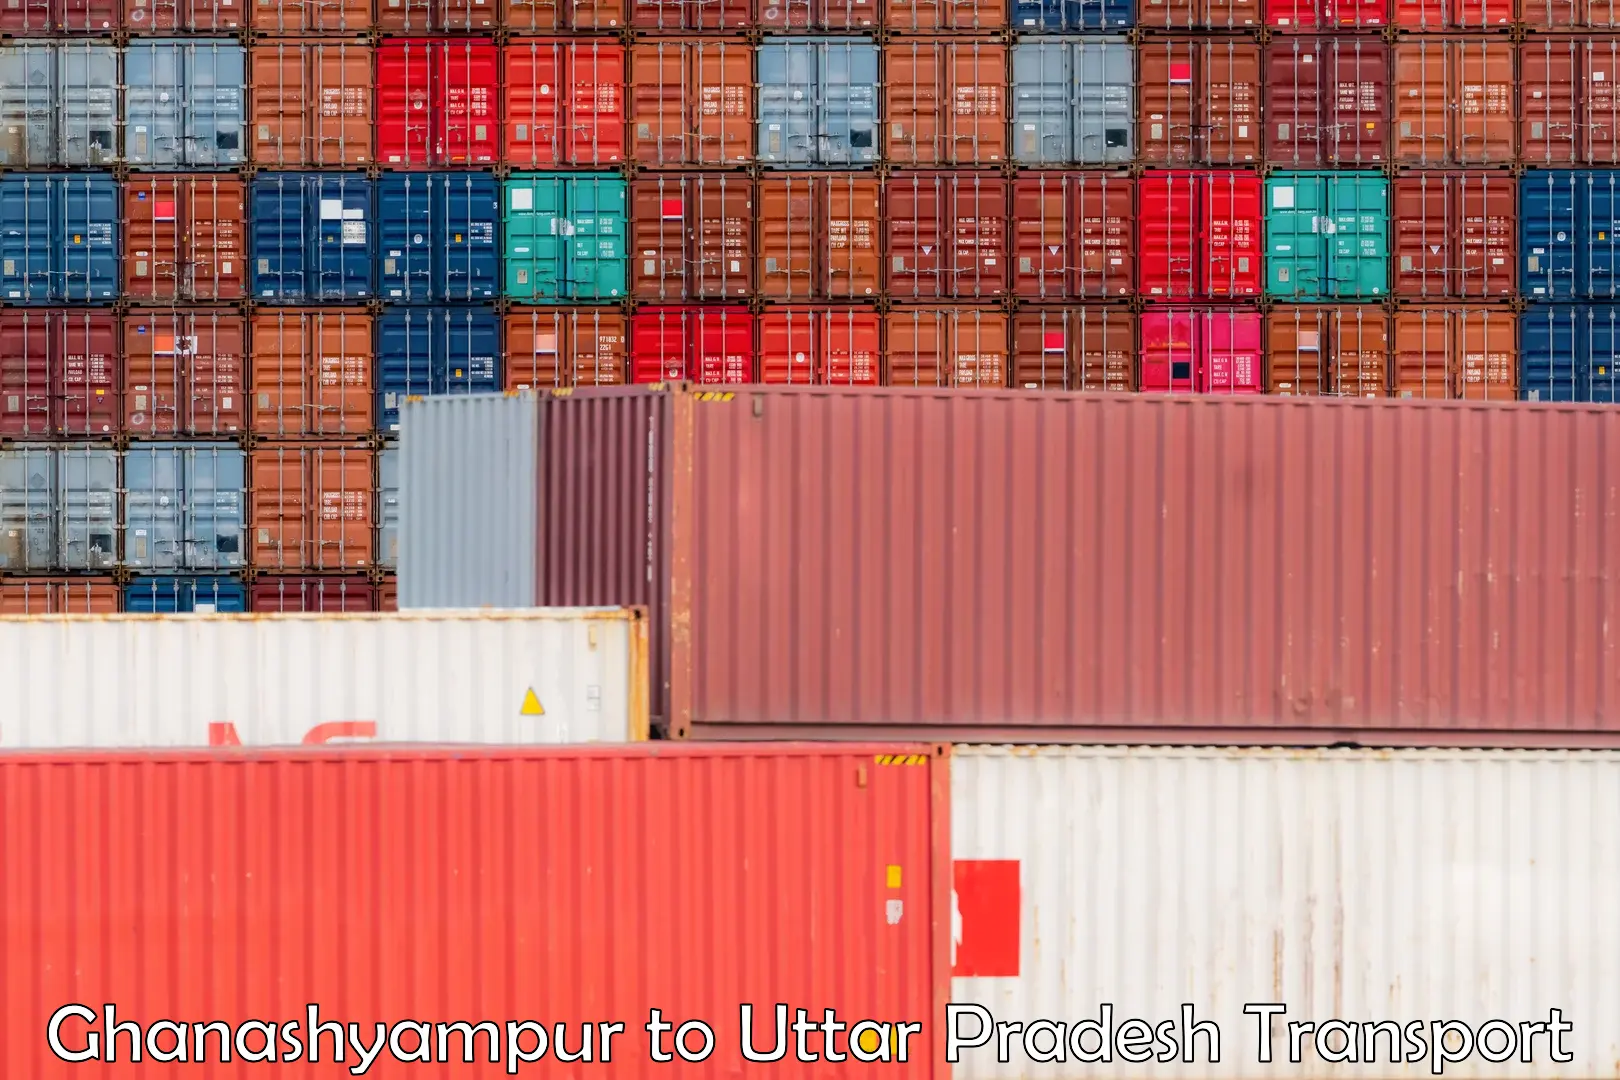 Truck transport companies in India Ghanashyampur to Unchahar